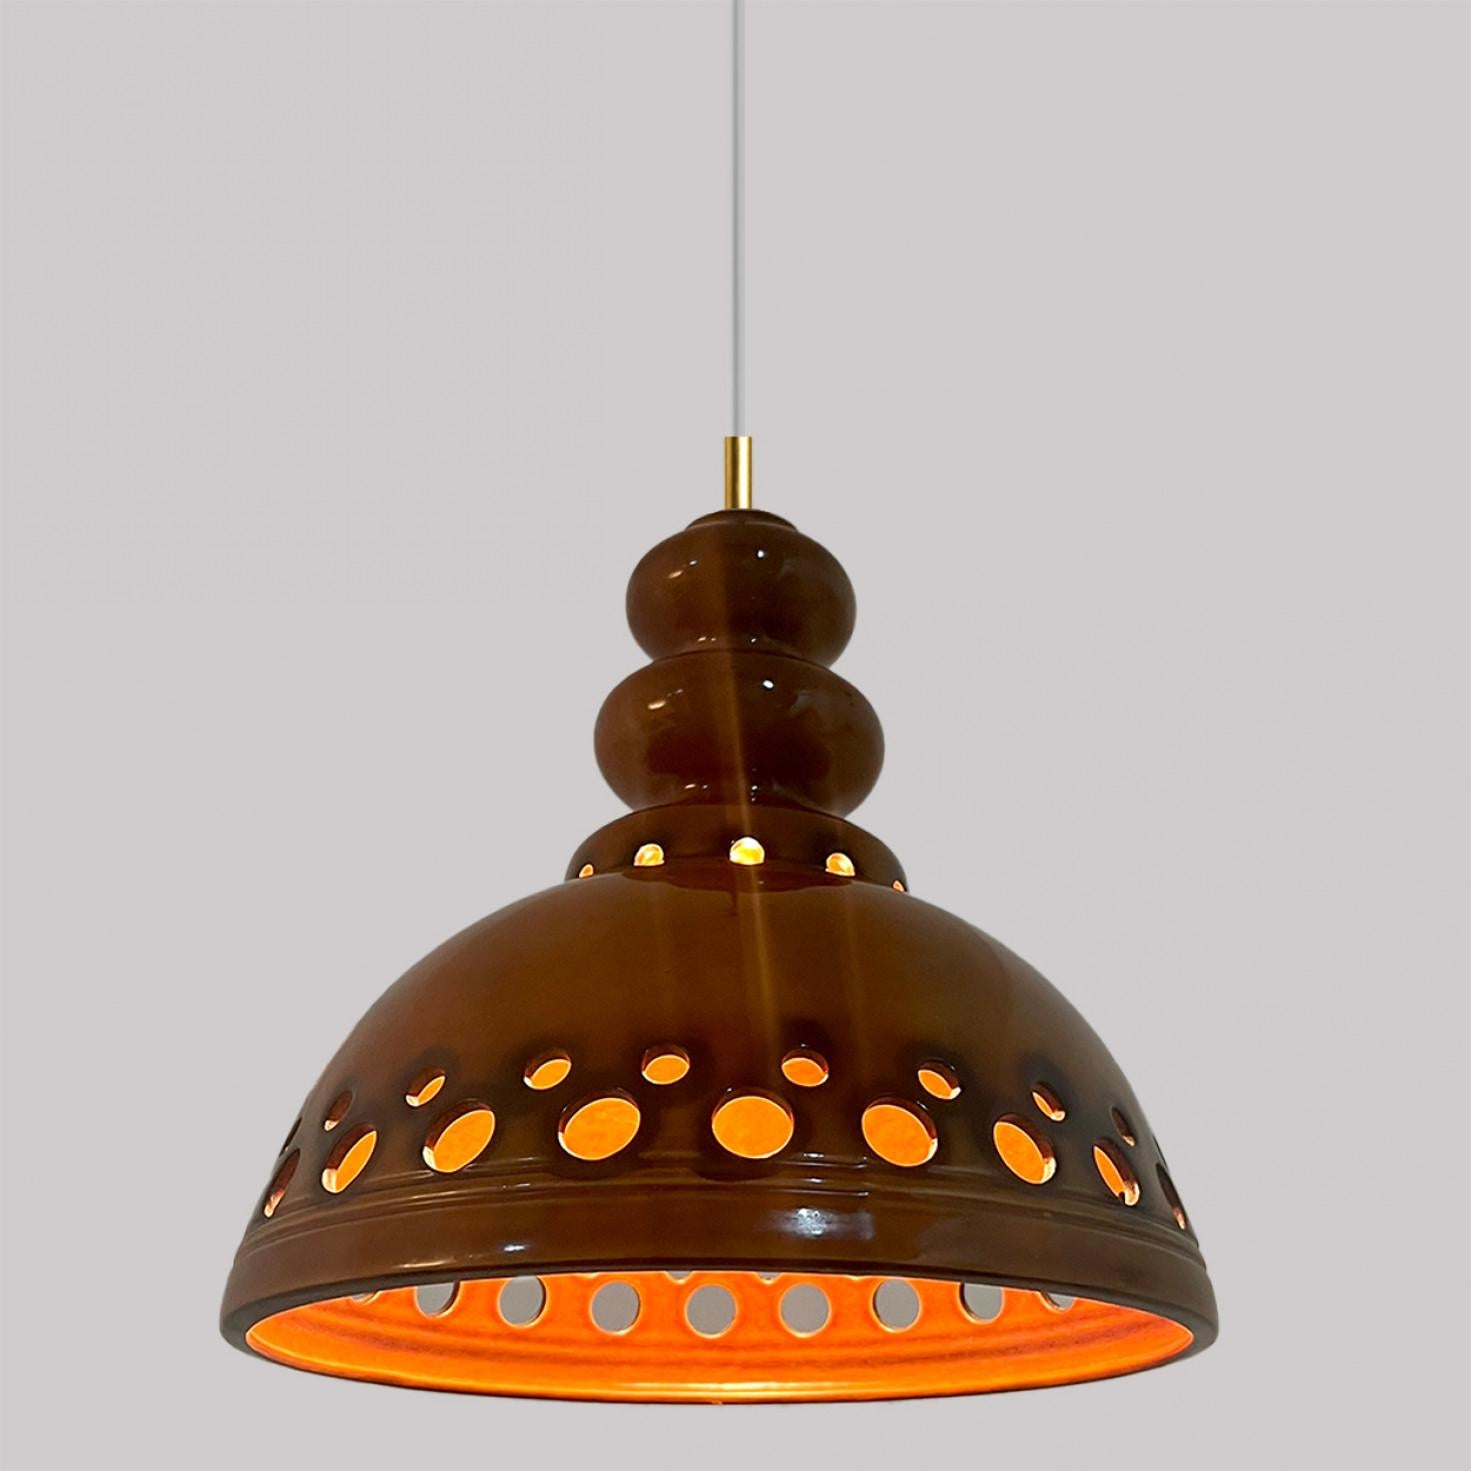 Set of Mixed Brown Glazed Ceramic Pendant Lights, Germany, 1970s For Sale 5